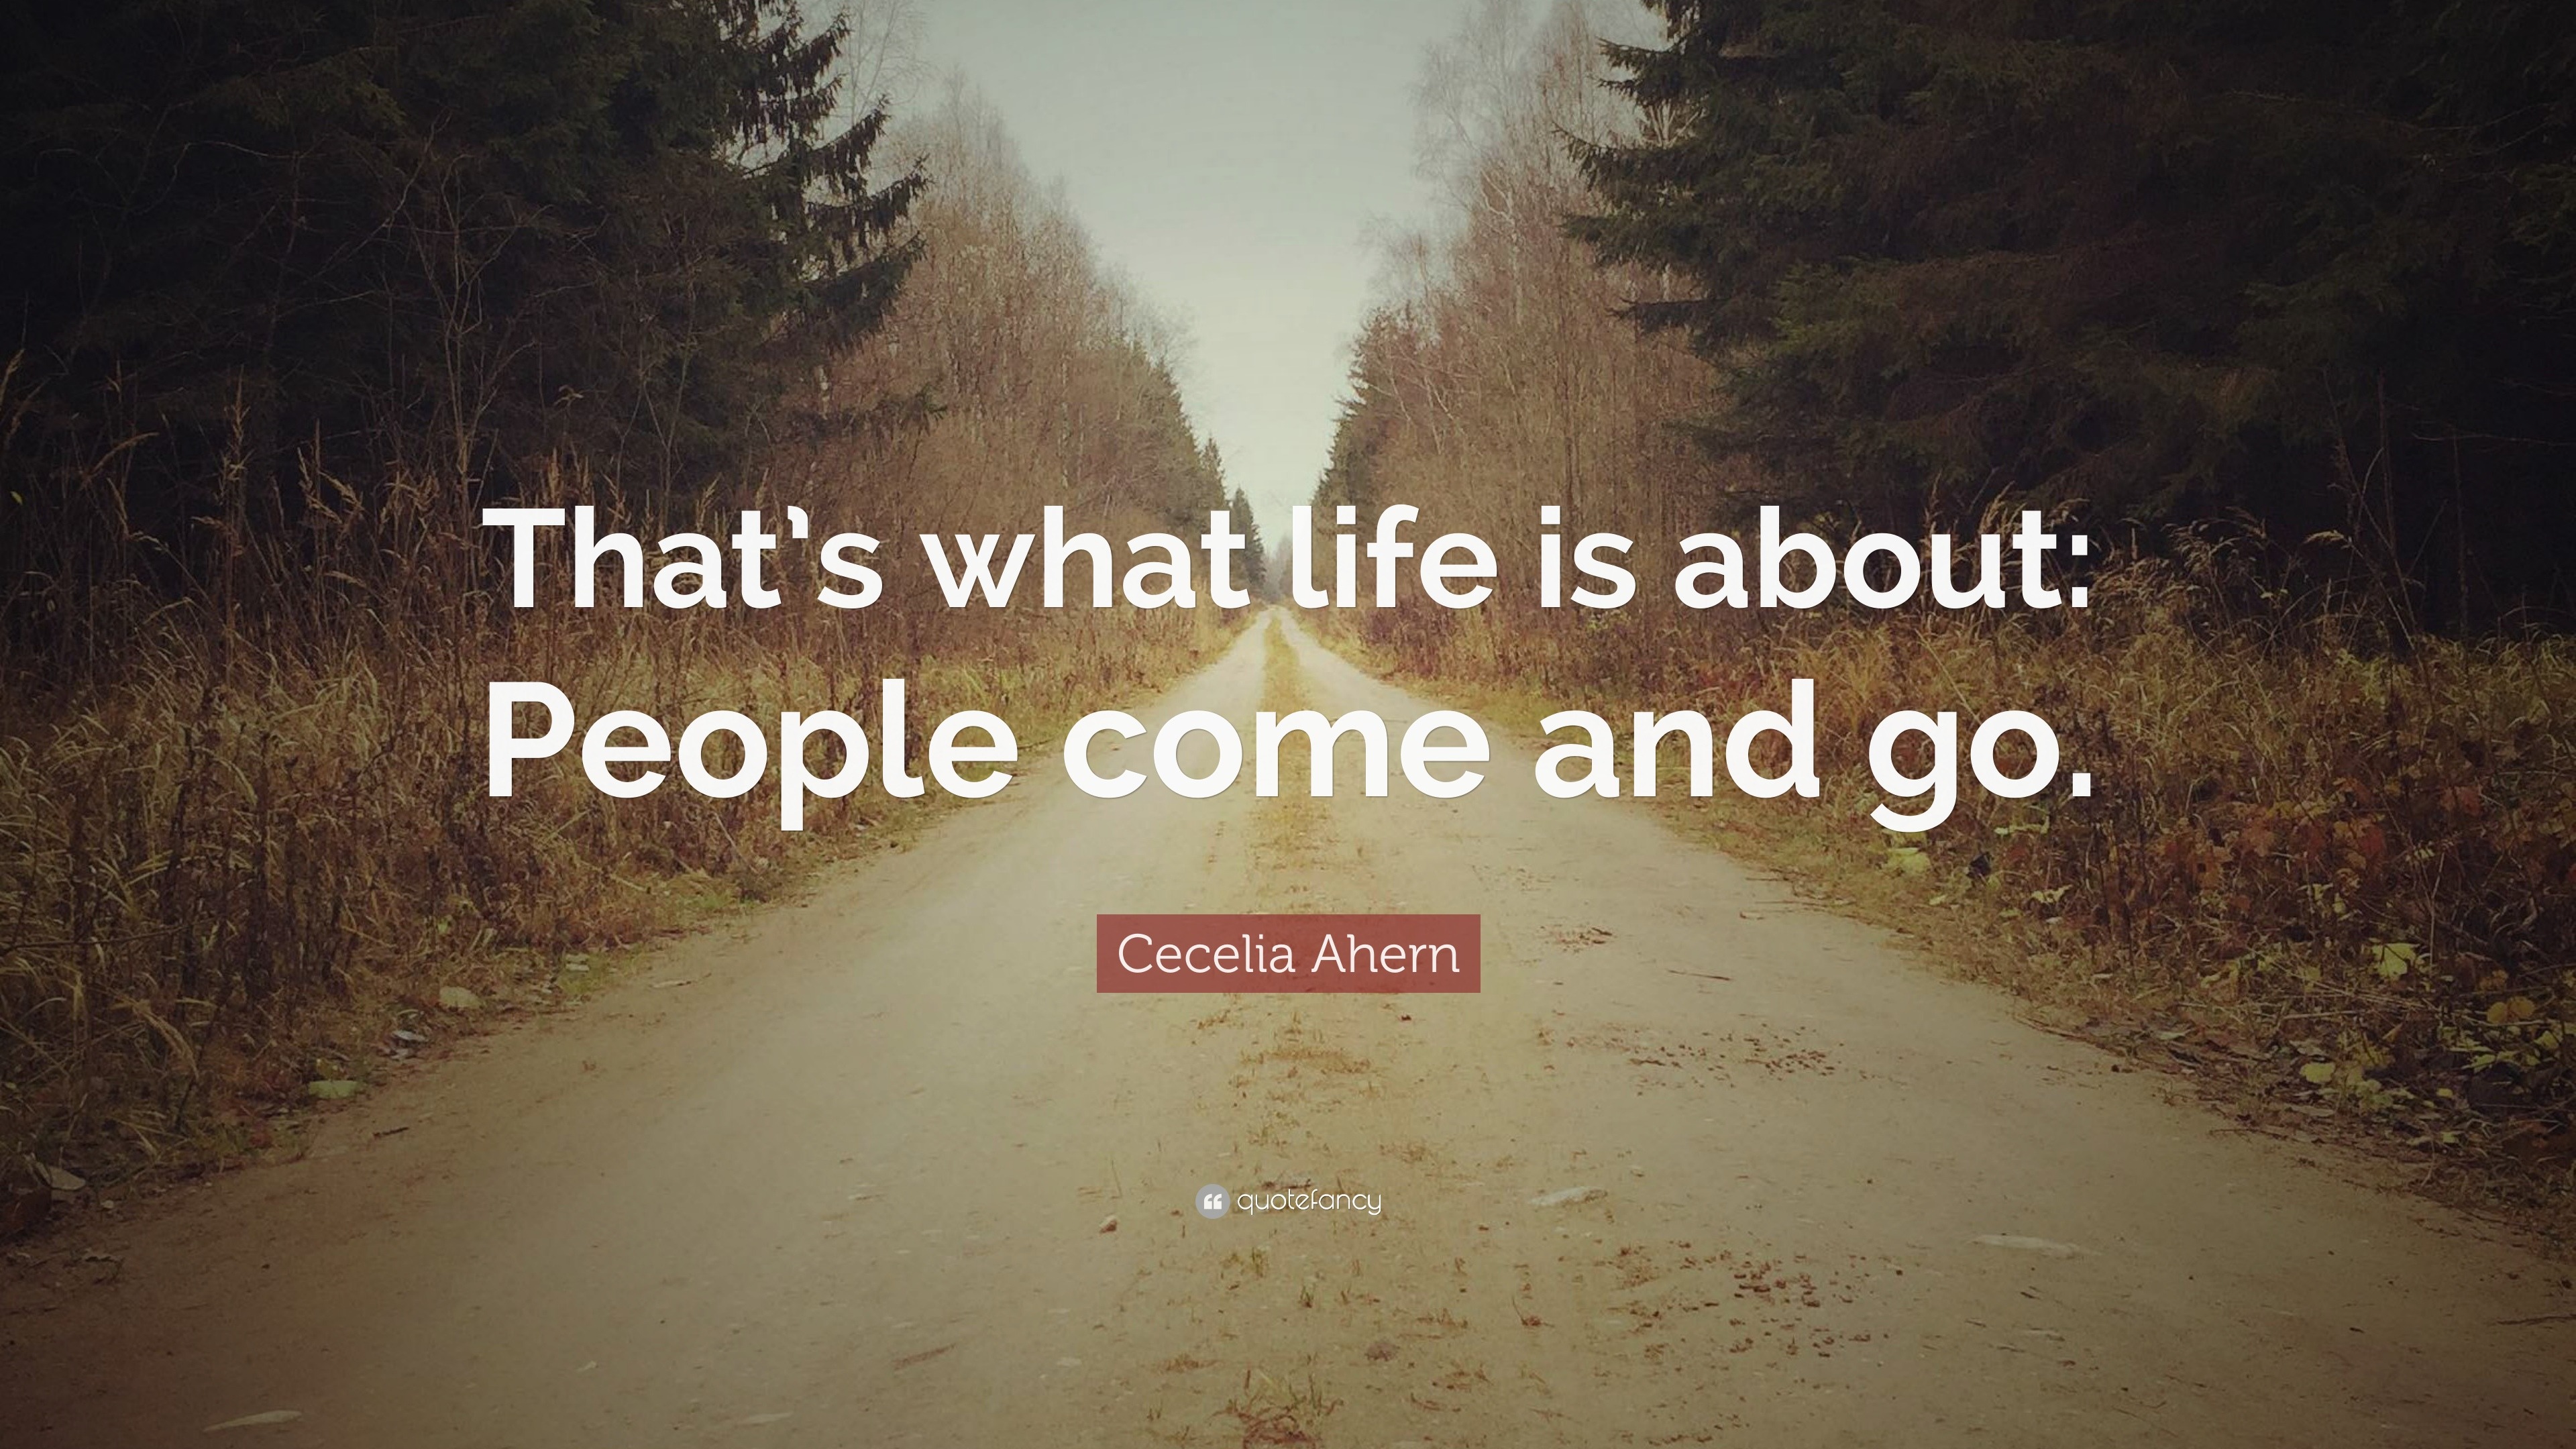 Cecelia Ahern Quote: “That's what life is about: People come and go.”